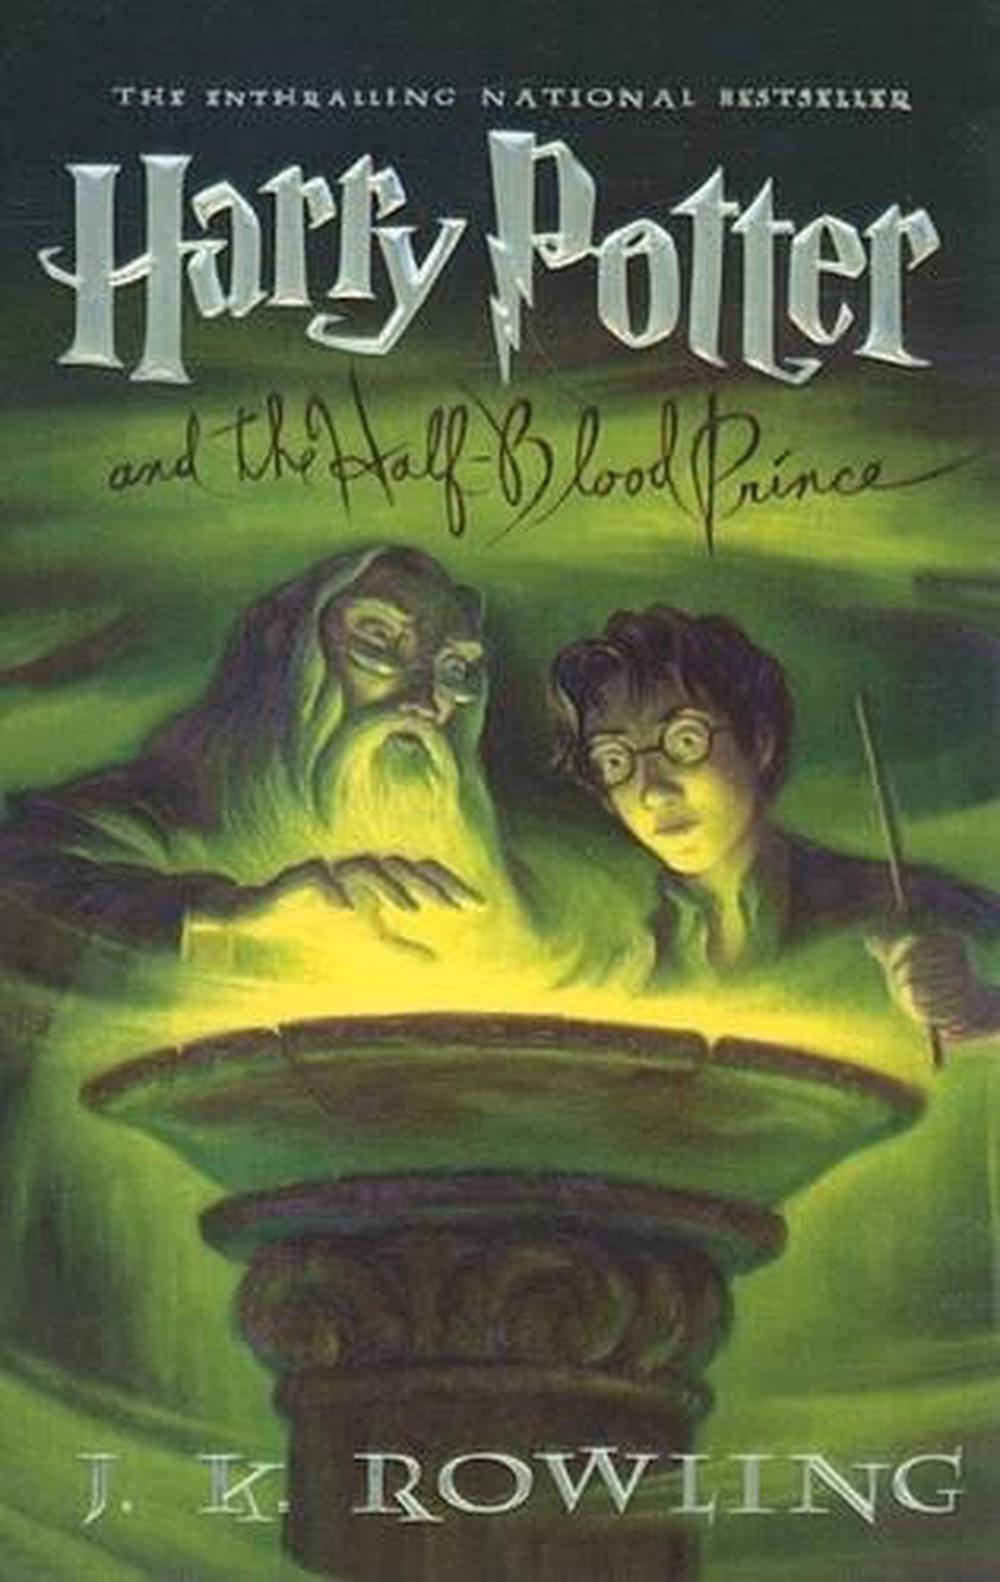 Harry Potter and the Half-Blood Prince for ios download